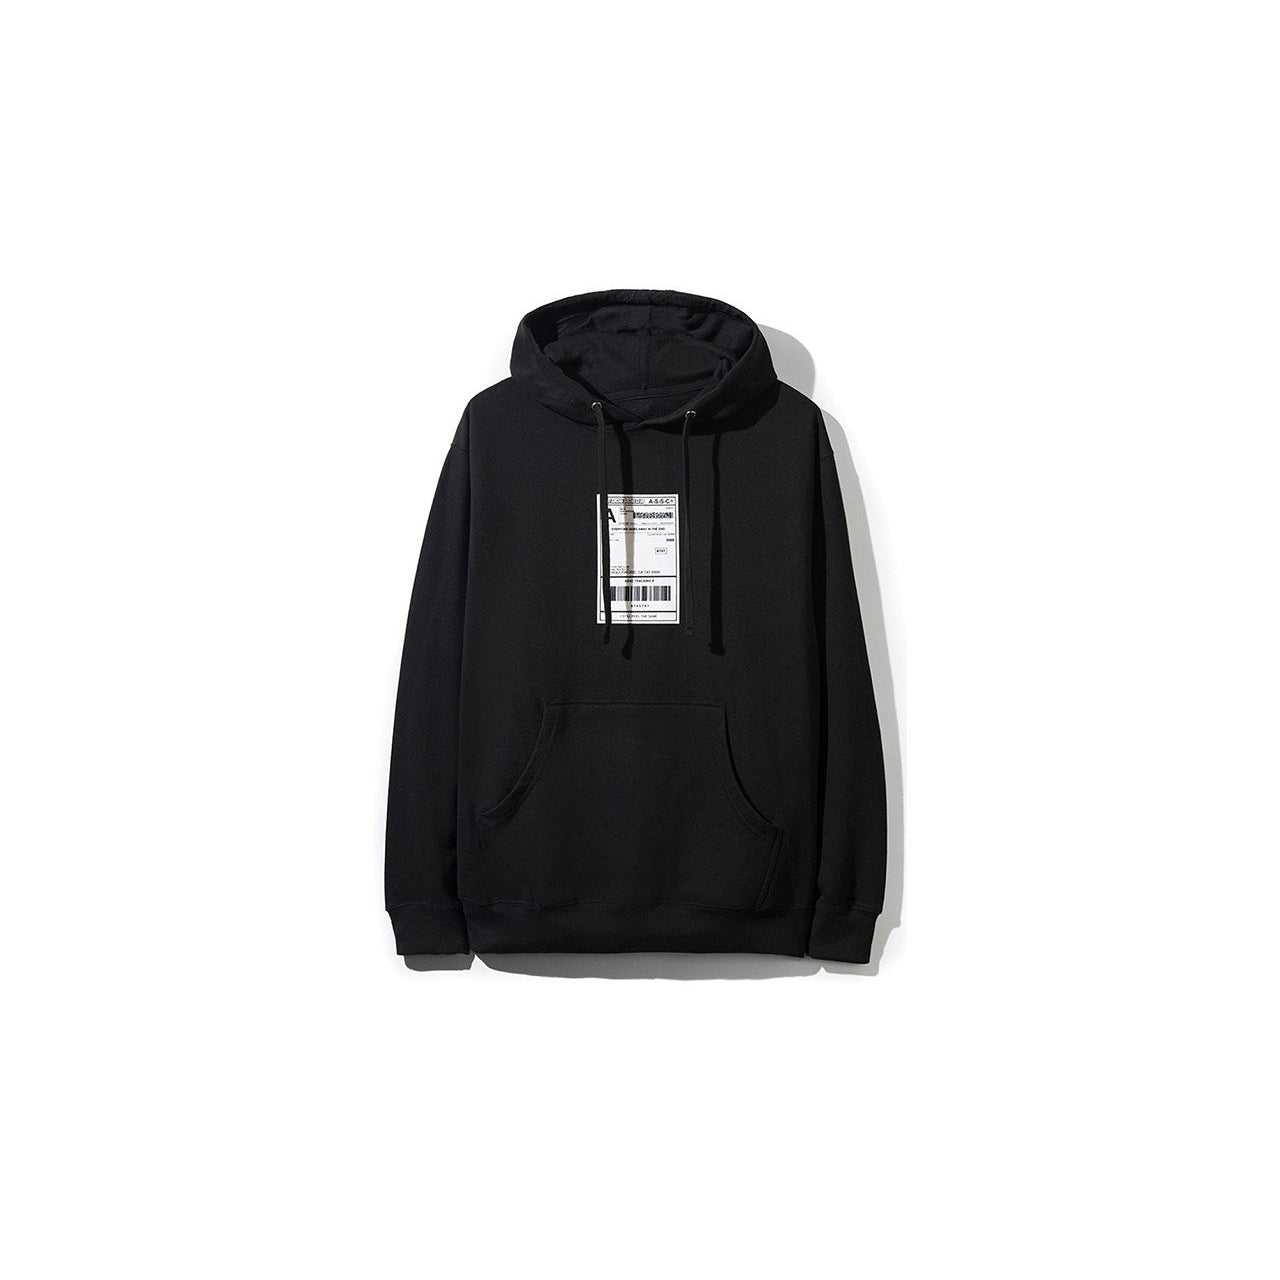 ASSC Black Shipping Label Hoodie - Centrall Online